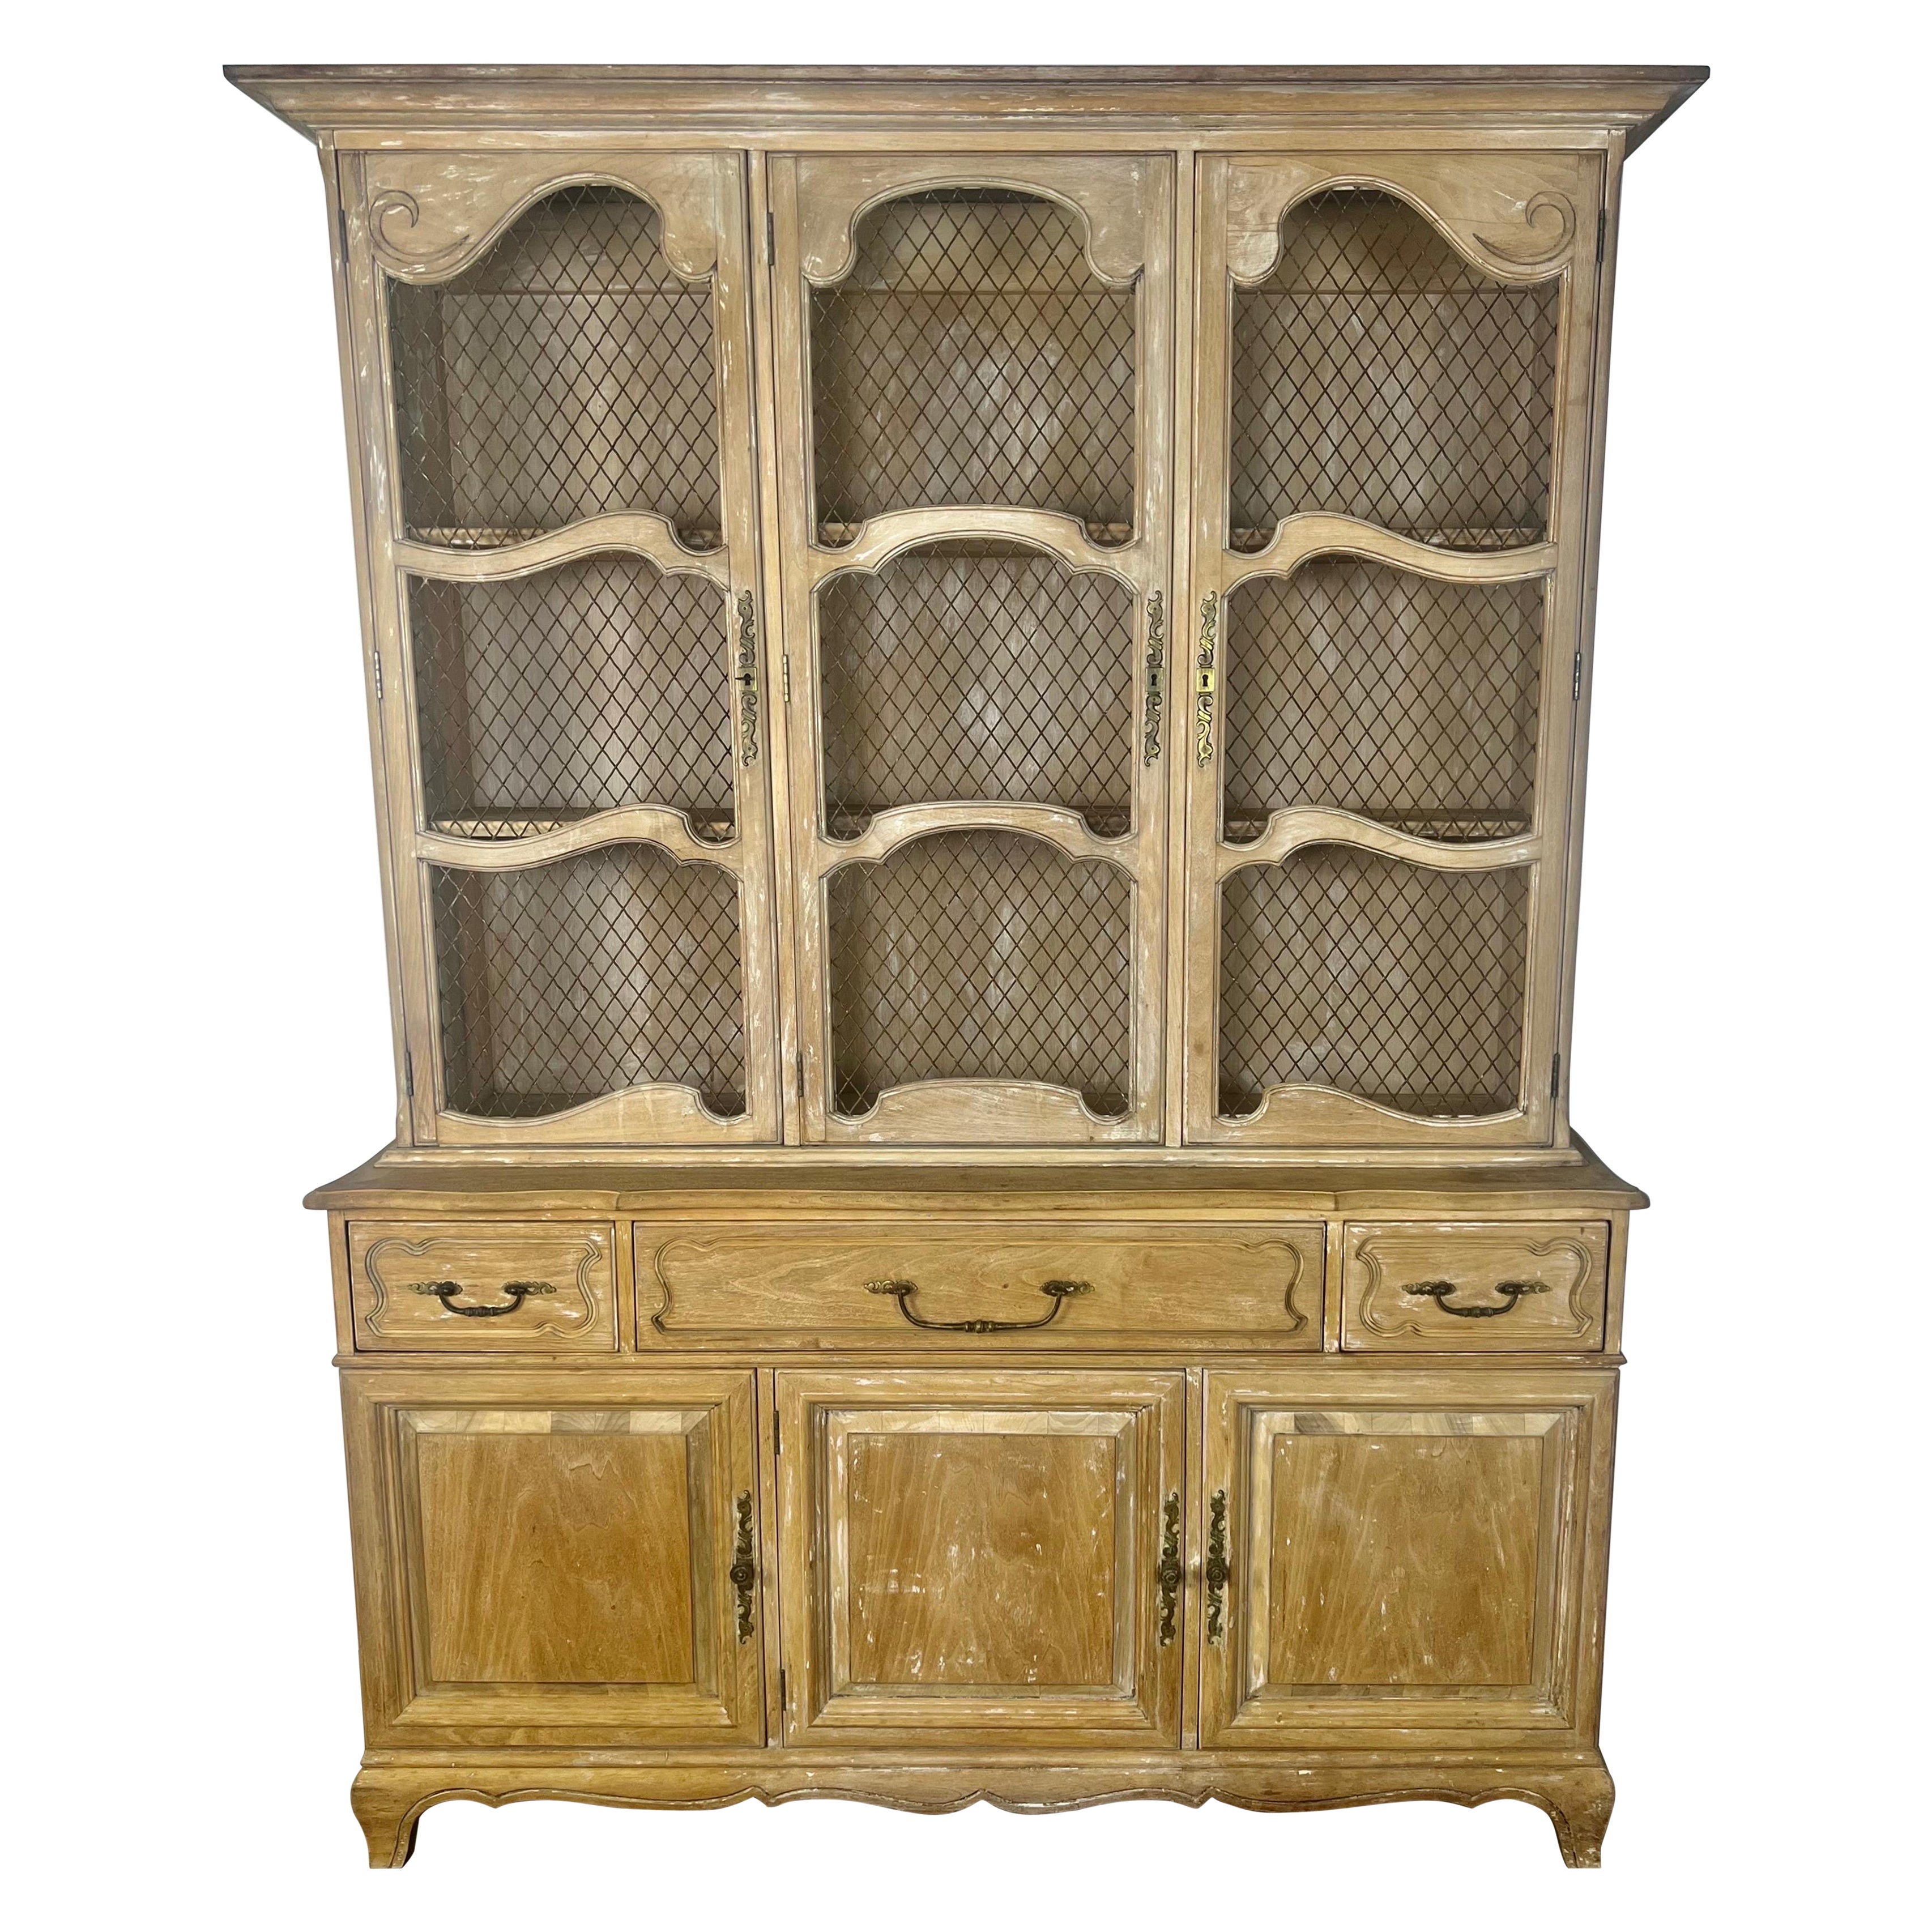 19th C. French Cabinet with Metal Detail on Doors